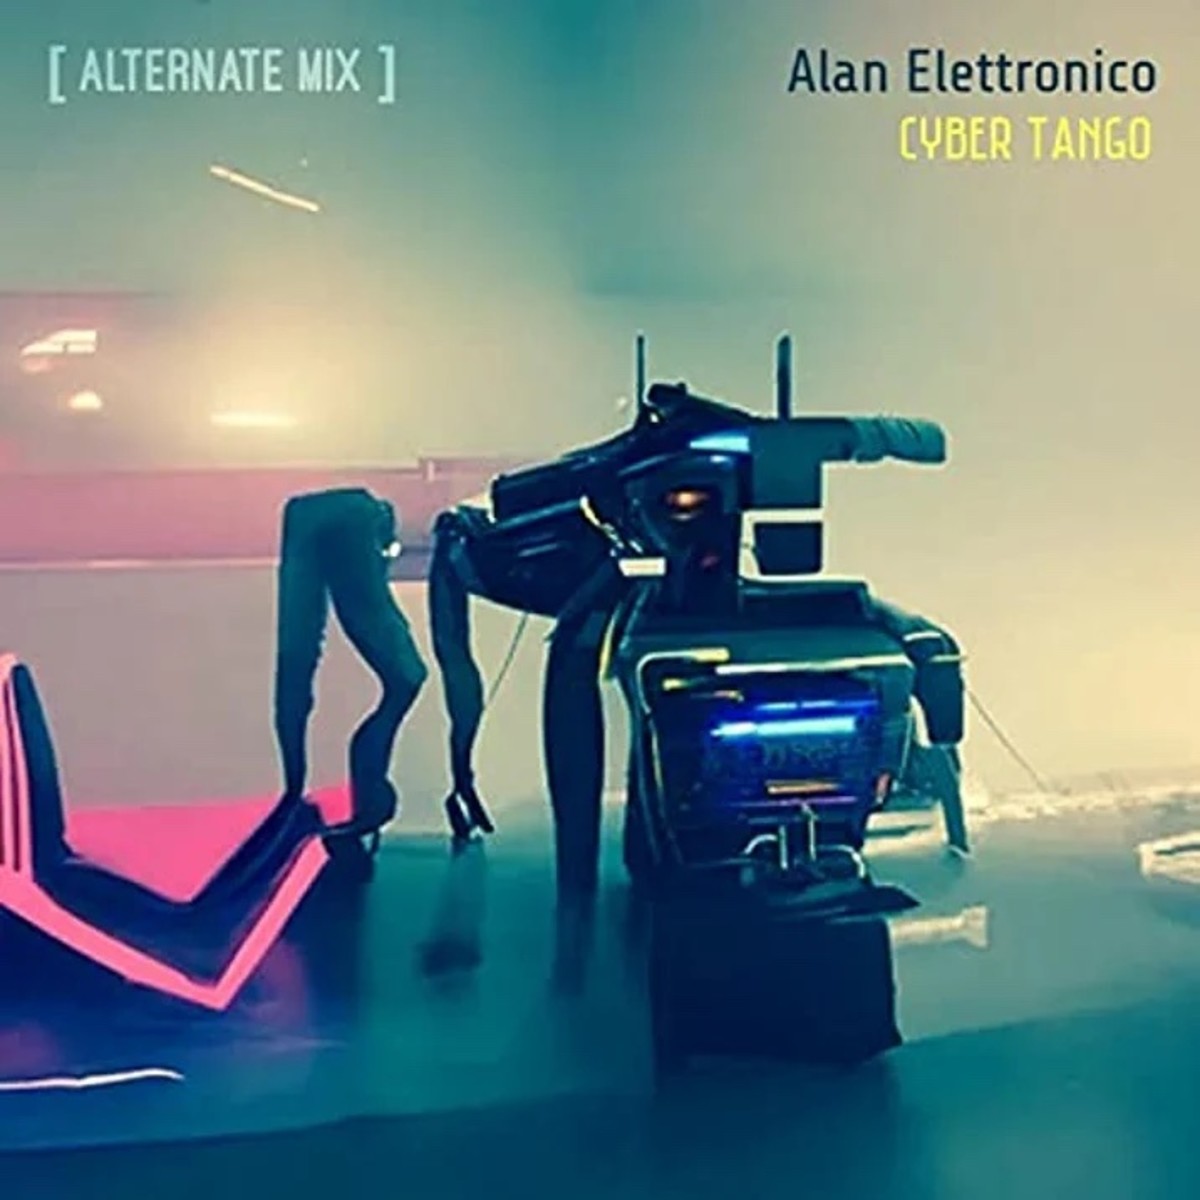 synth-single-review-cyber-tango-alternate-mix-by-alan-elettronico